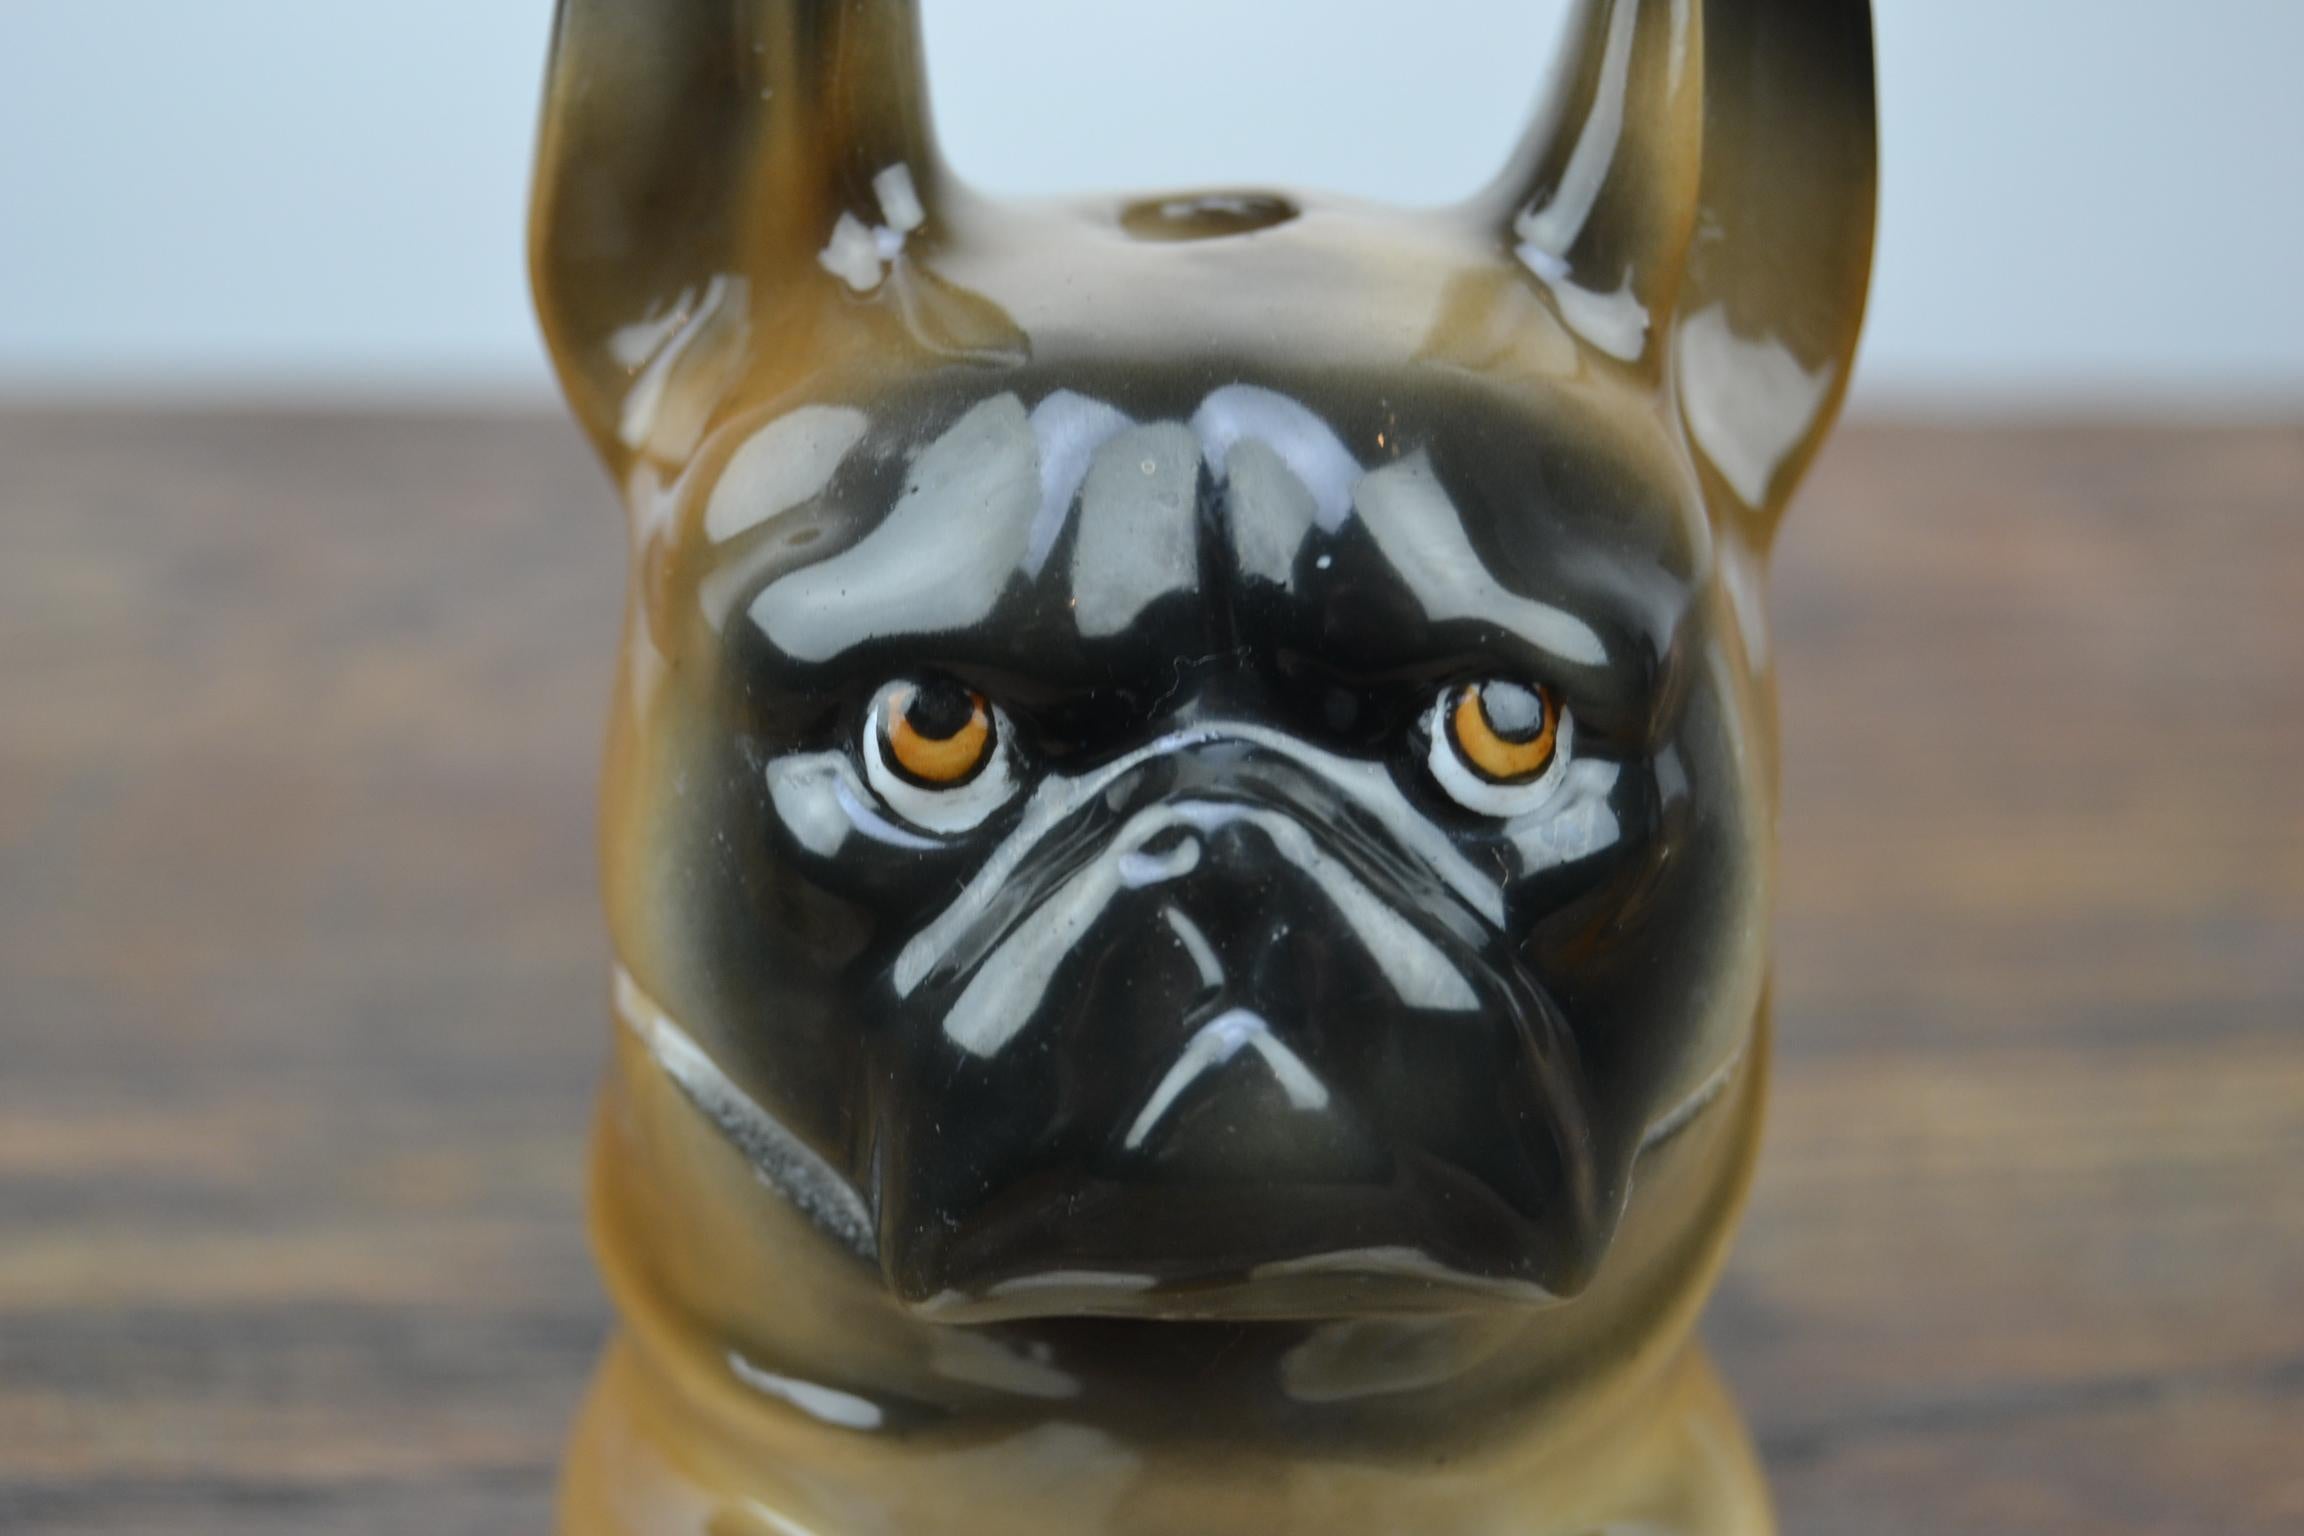 Who doens't want to have this cutie on his desk?
A porcelain French Bulldog Inkwell - Frenchie Statue.
This Animal Inkwell - Dog Inkwell is a brown with black dog, speaking big tri- colored eyes and two long ears.
This dog figurine - animal